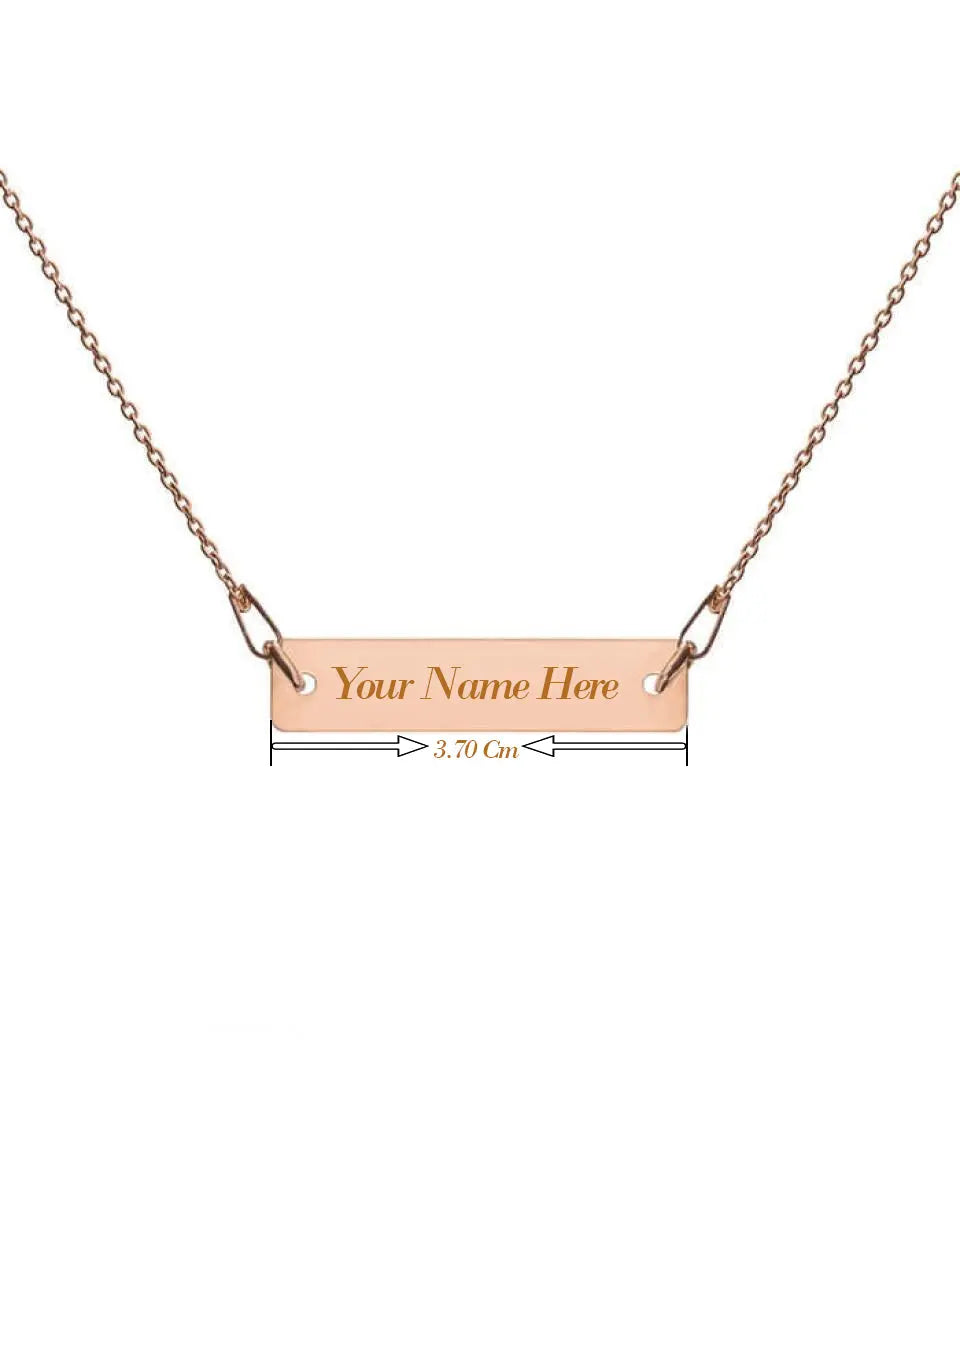 Name Plate Necklace Customizer